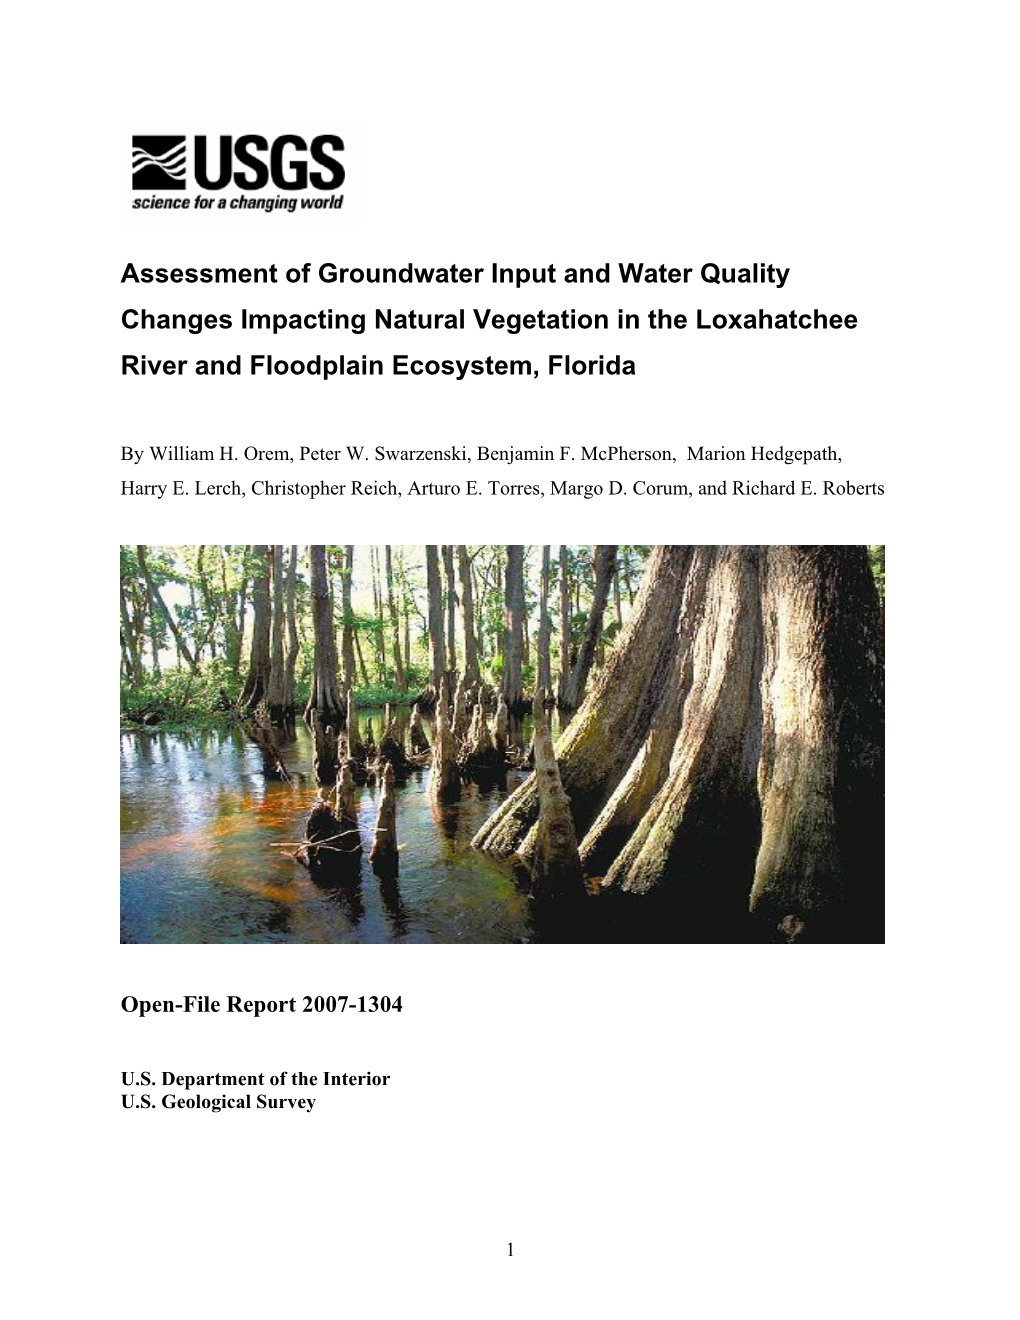 Assessment of Water Quality and Overall Groundwater Input